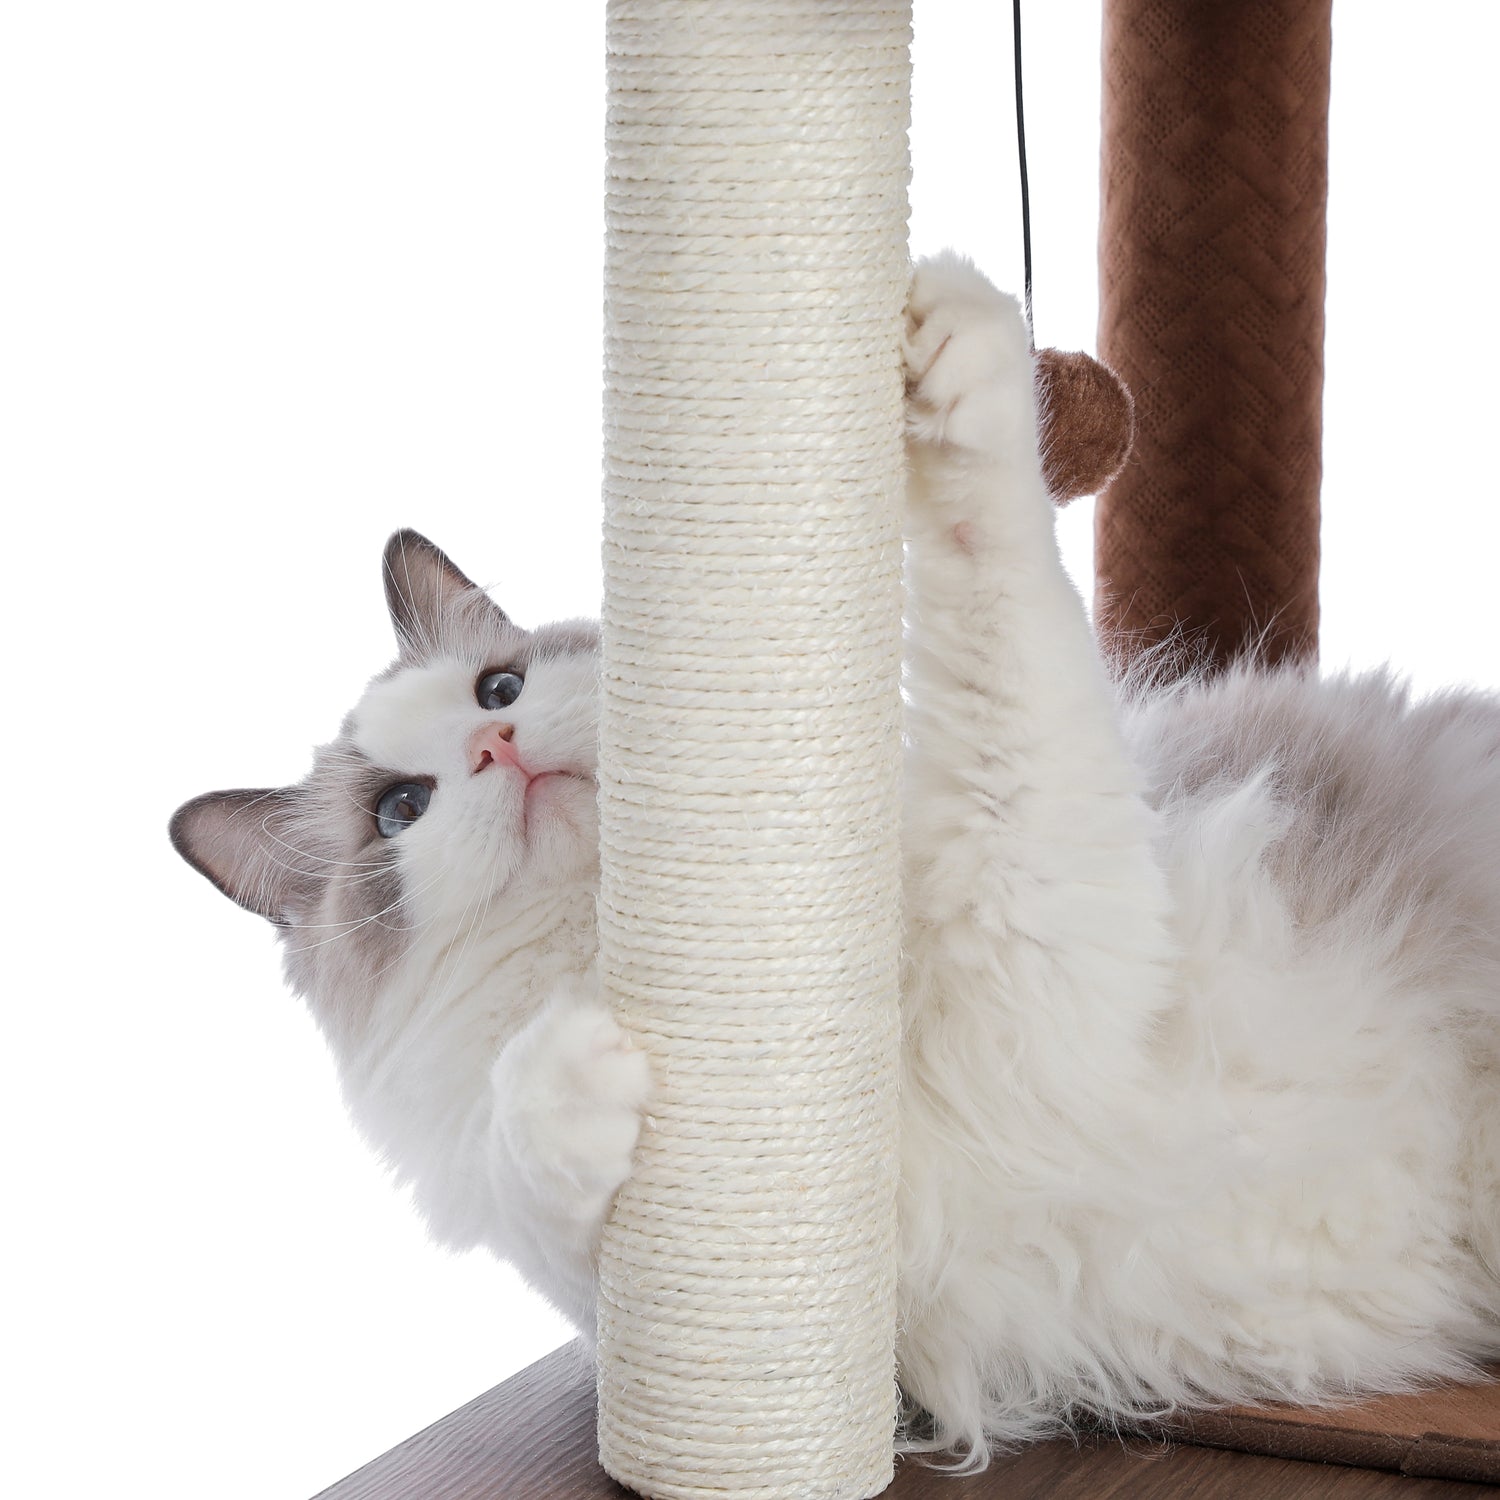 PAWZ Road 56" Wooden Cat Tree Tower with Large Storage Box for Indoor Cats,Brown Animals & Pet Supplies > Pet Supplies > Cat Supplies > Cat Furniture Wal02-AMT0167BN   